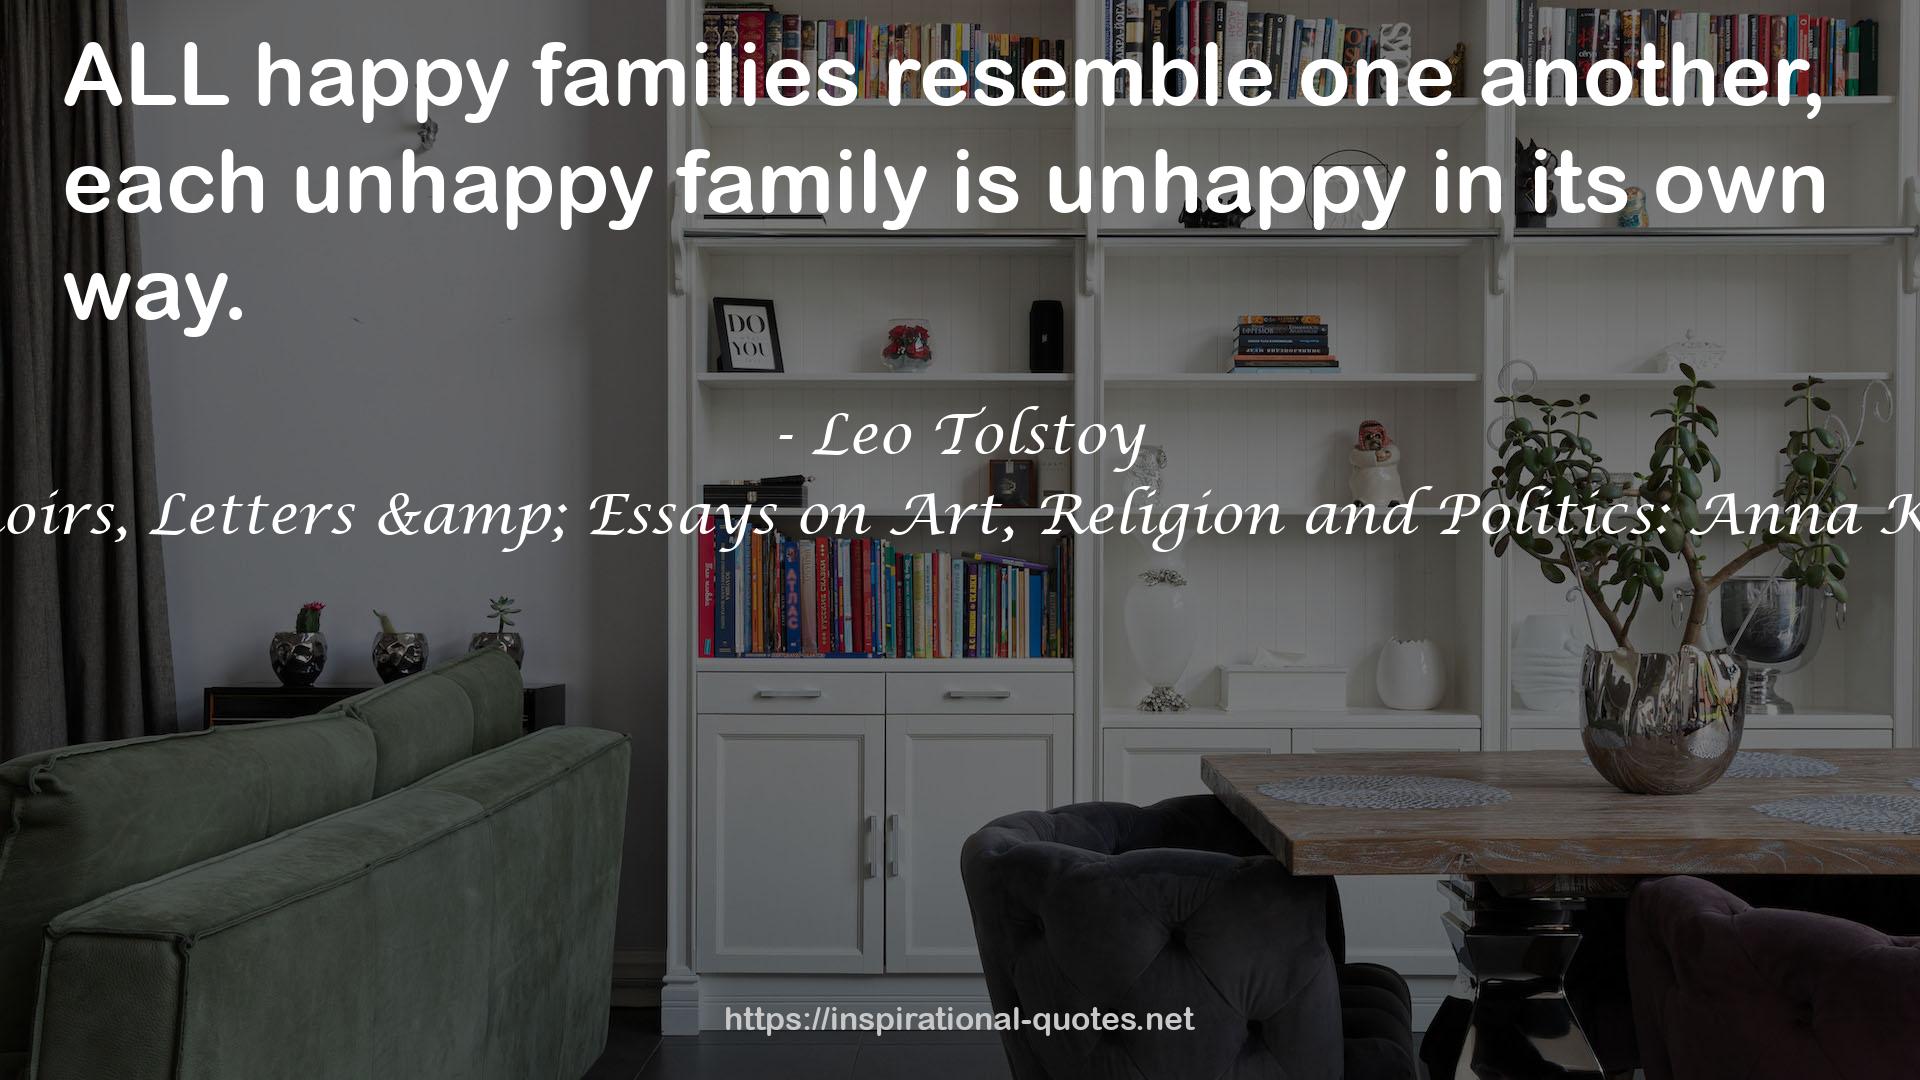 The Complete Works of Leo Tolstoy: Novels, Short Stories, Plays, Memoirs, Letters & Essays on Art, Religion and Politics: Anna Karenina, War and Peace, ... and Stories for Children and Many More QUOTES